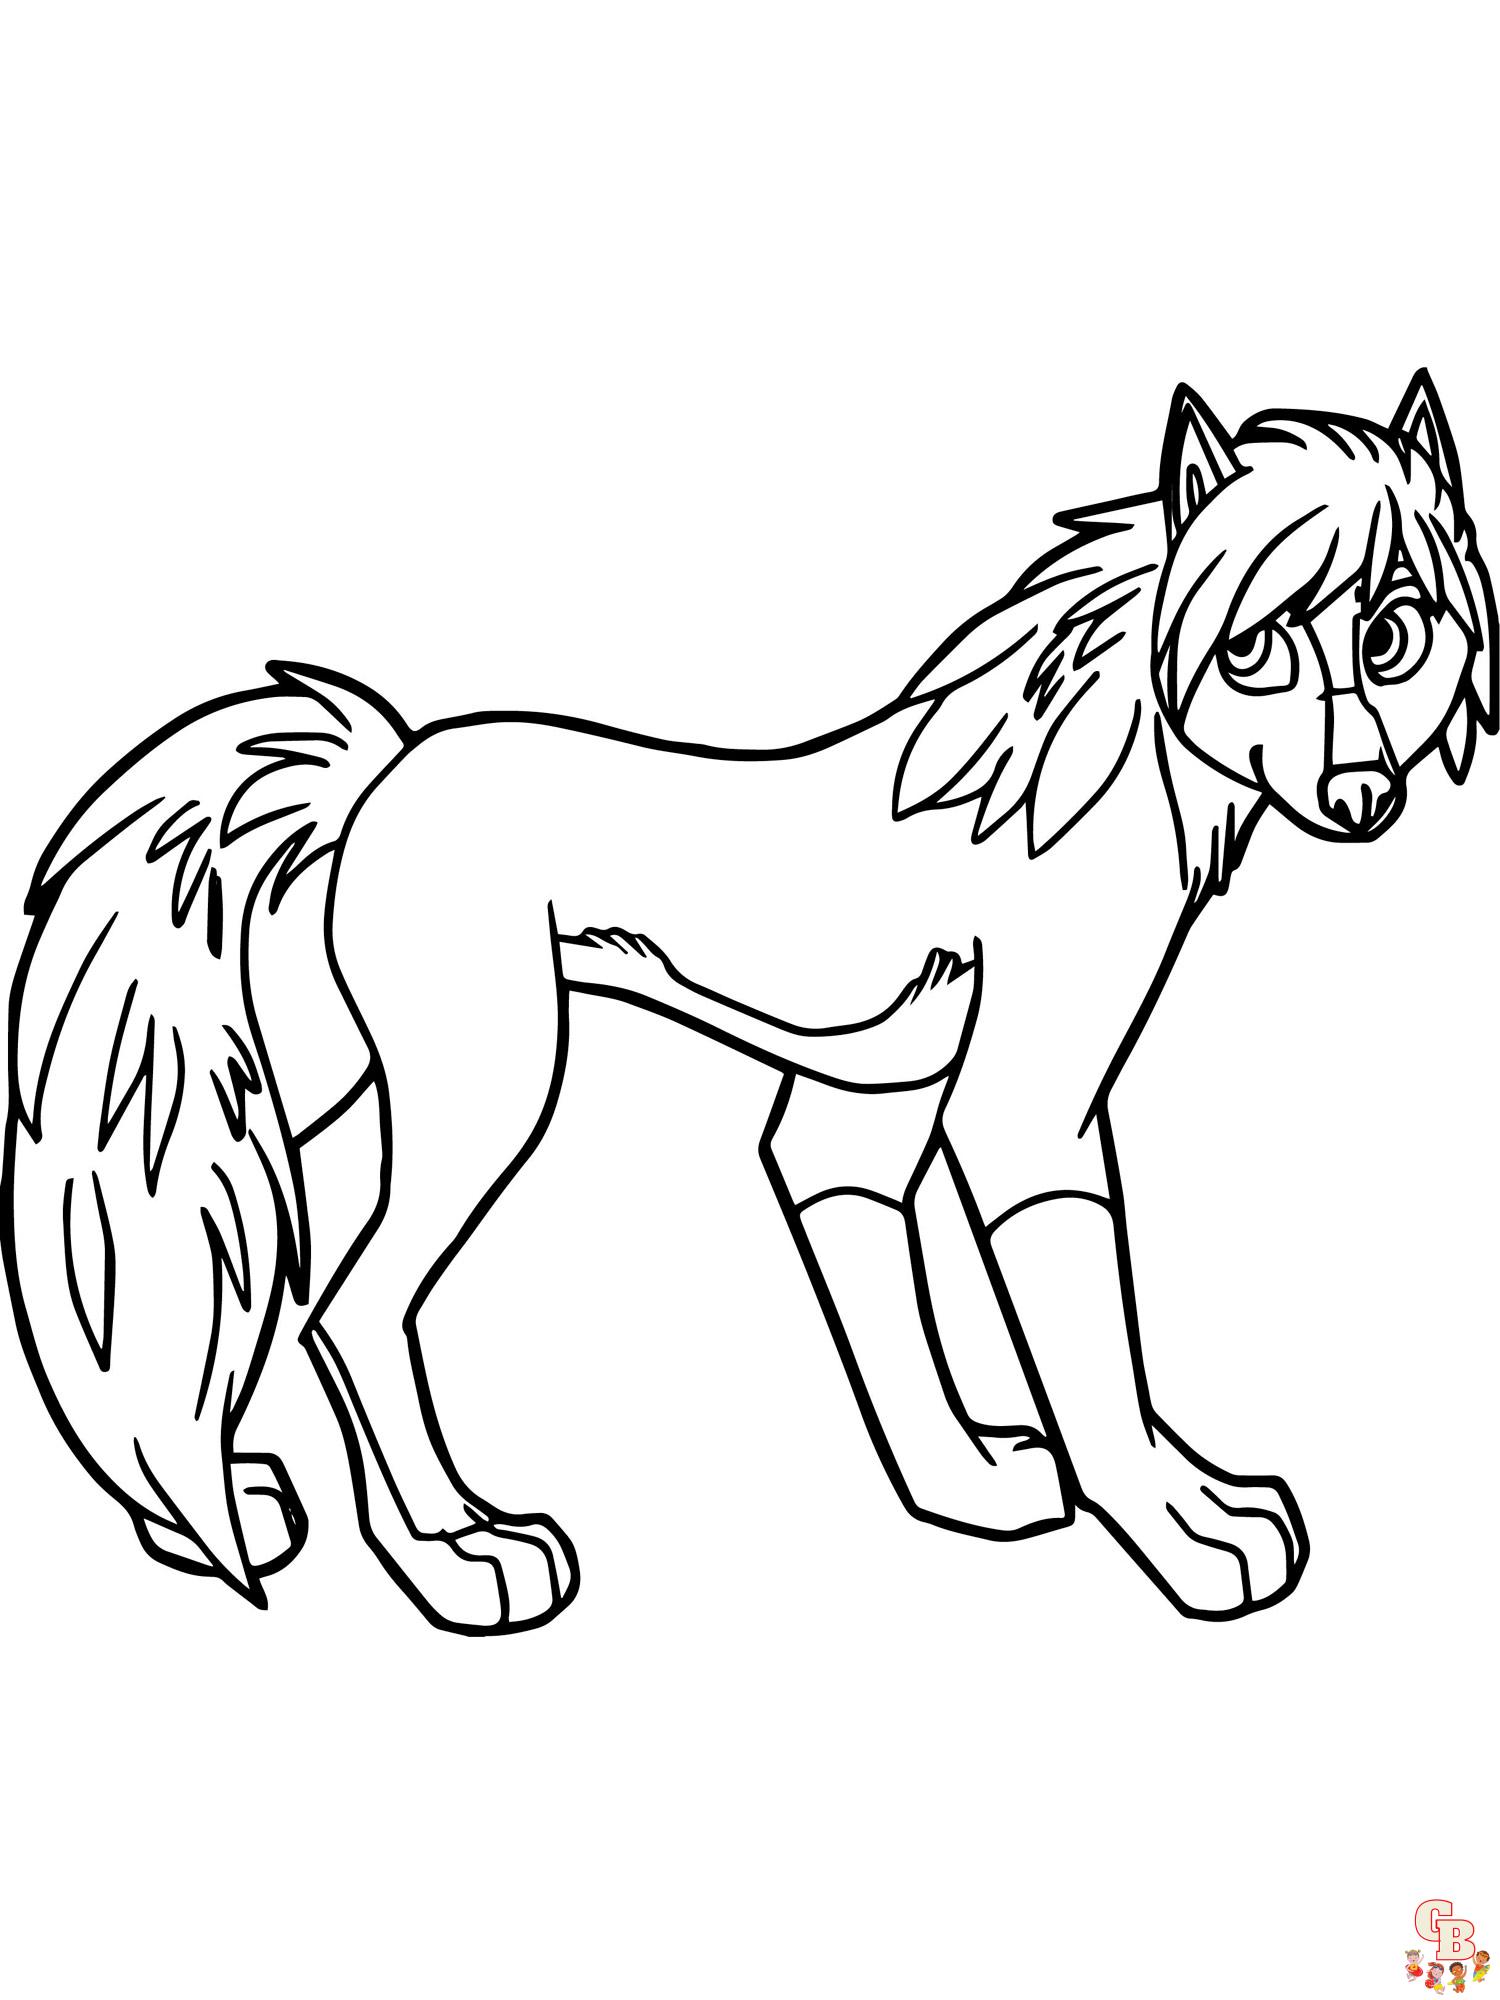 Alpha And Omega Coloring Pages 10